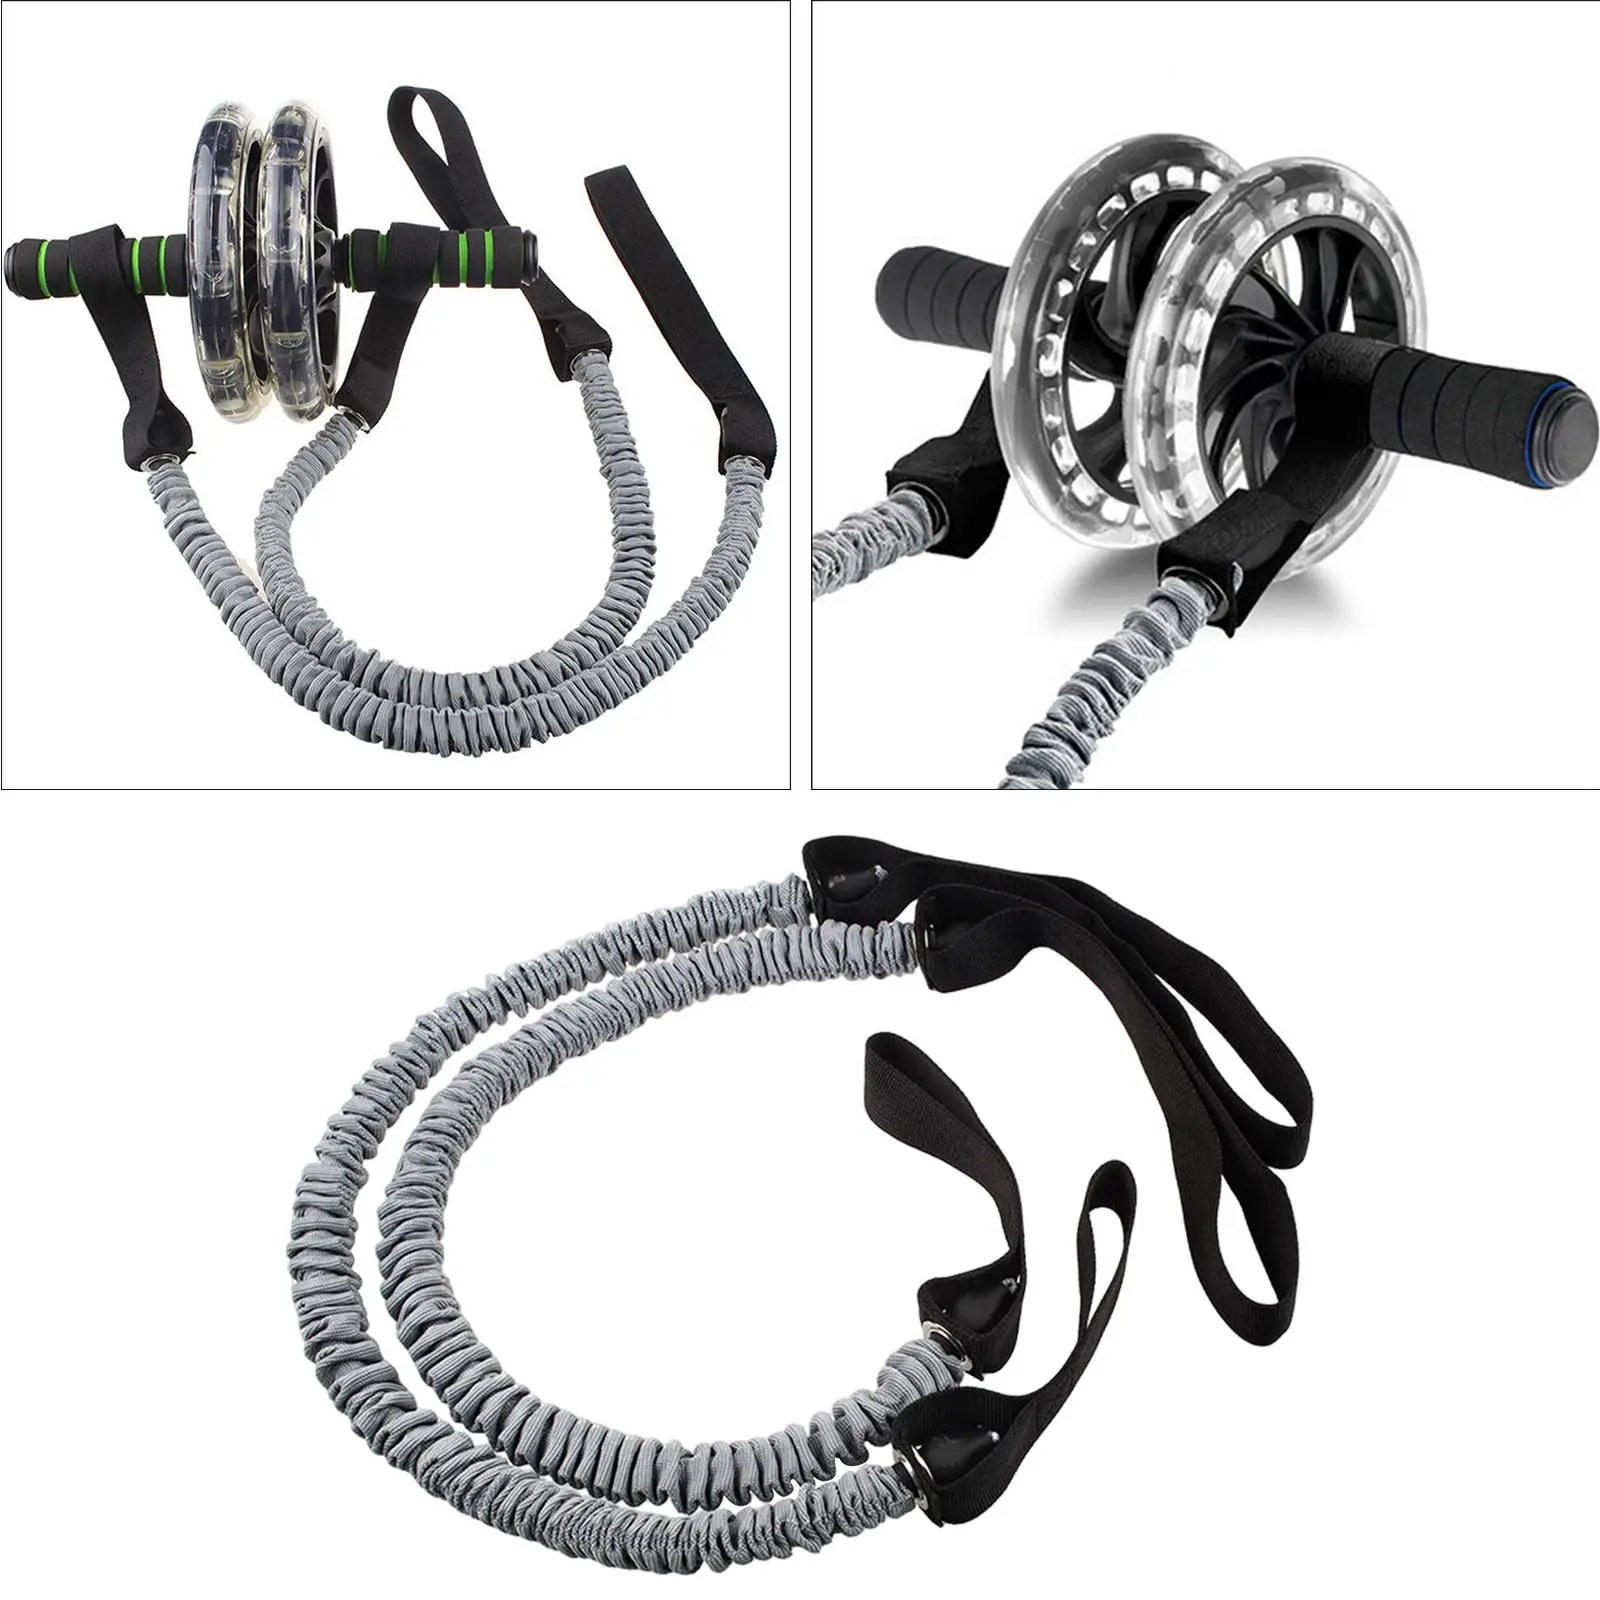 1 Pair Abdominal Roller Wheel Pull Rope Waist Abdominal Exercise Resistance Band for Legs Arms Chest Back Shoulders Stretching